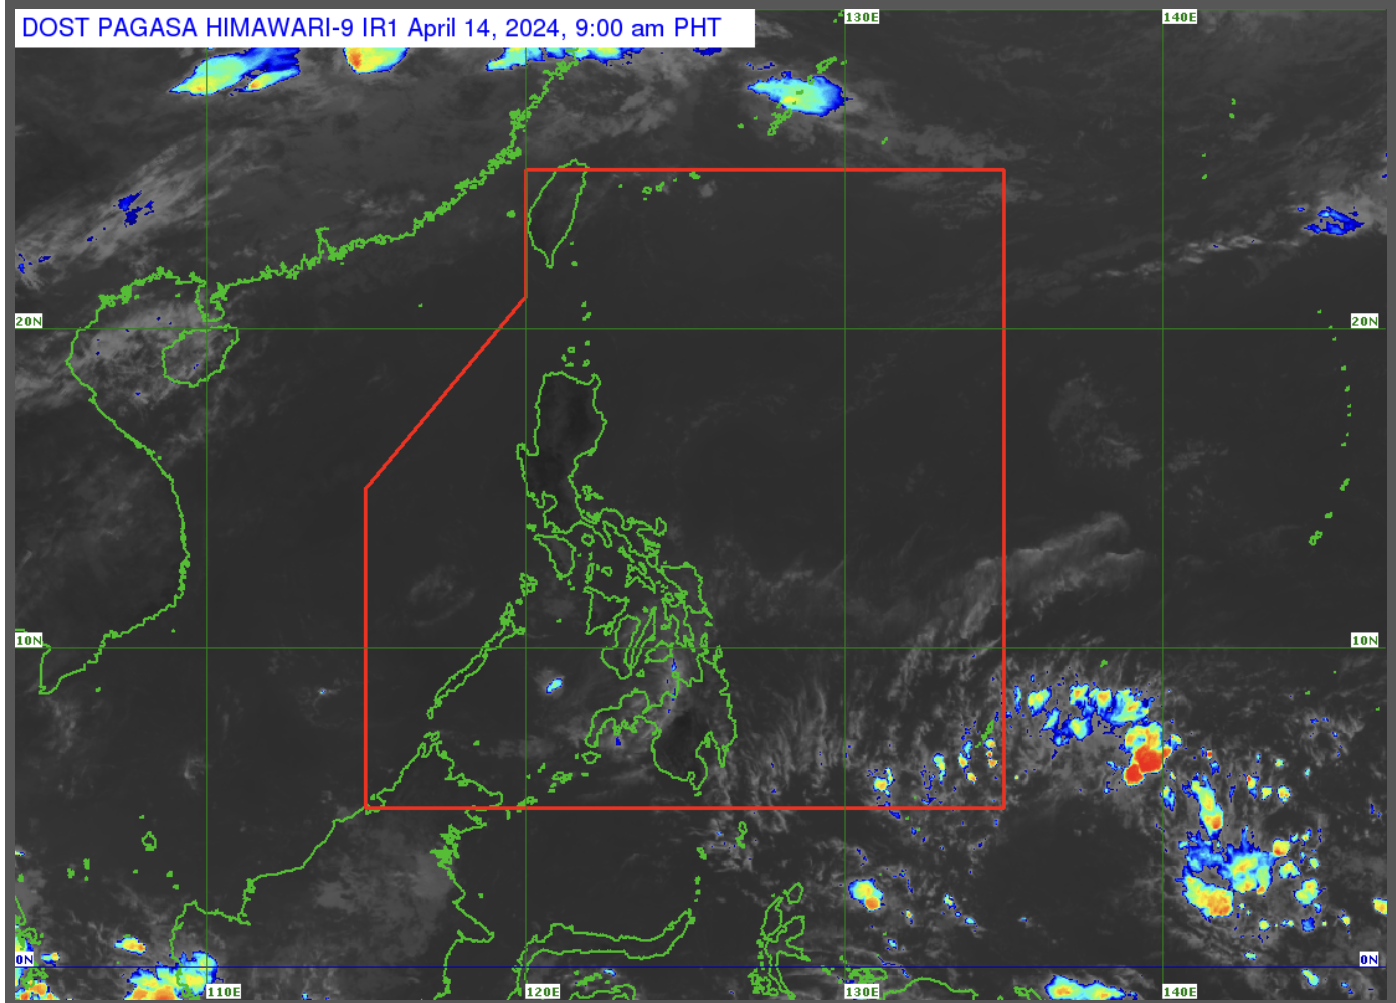 Metro Manila and most parts of Luzon will have hot and humid weather, and the rest of the country will have cloudy skies on Sunday, April 14, 2024, Pagasa said. (Photo courtesy of Pagasa)